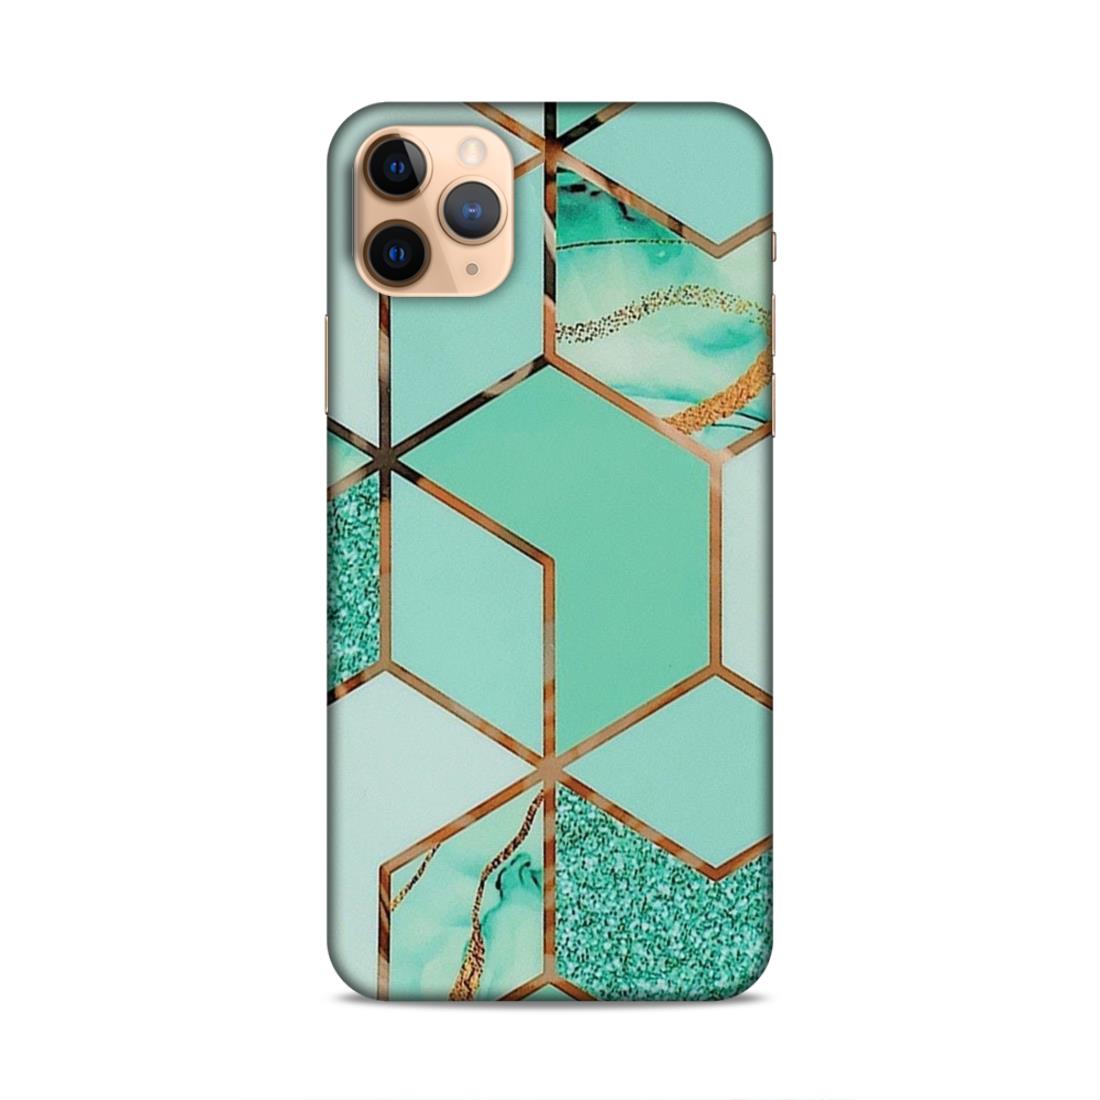 Hexagonal Marble Pattern Hard Back Case For Apple iPhone 11 Pro